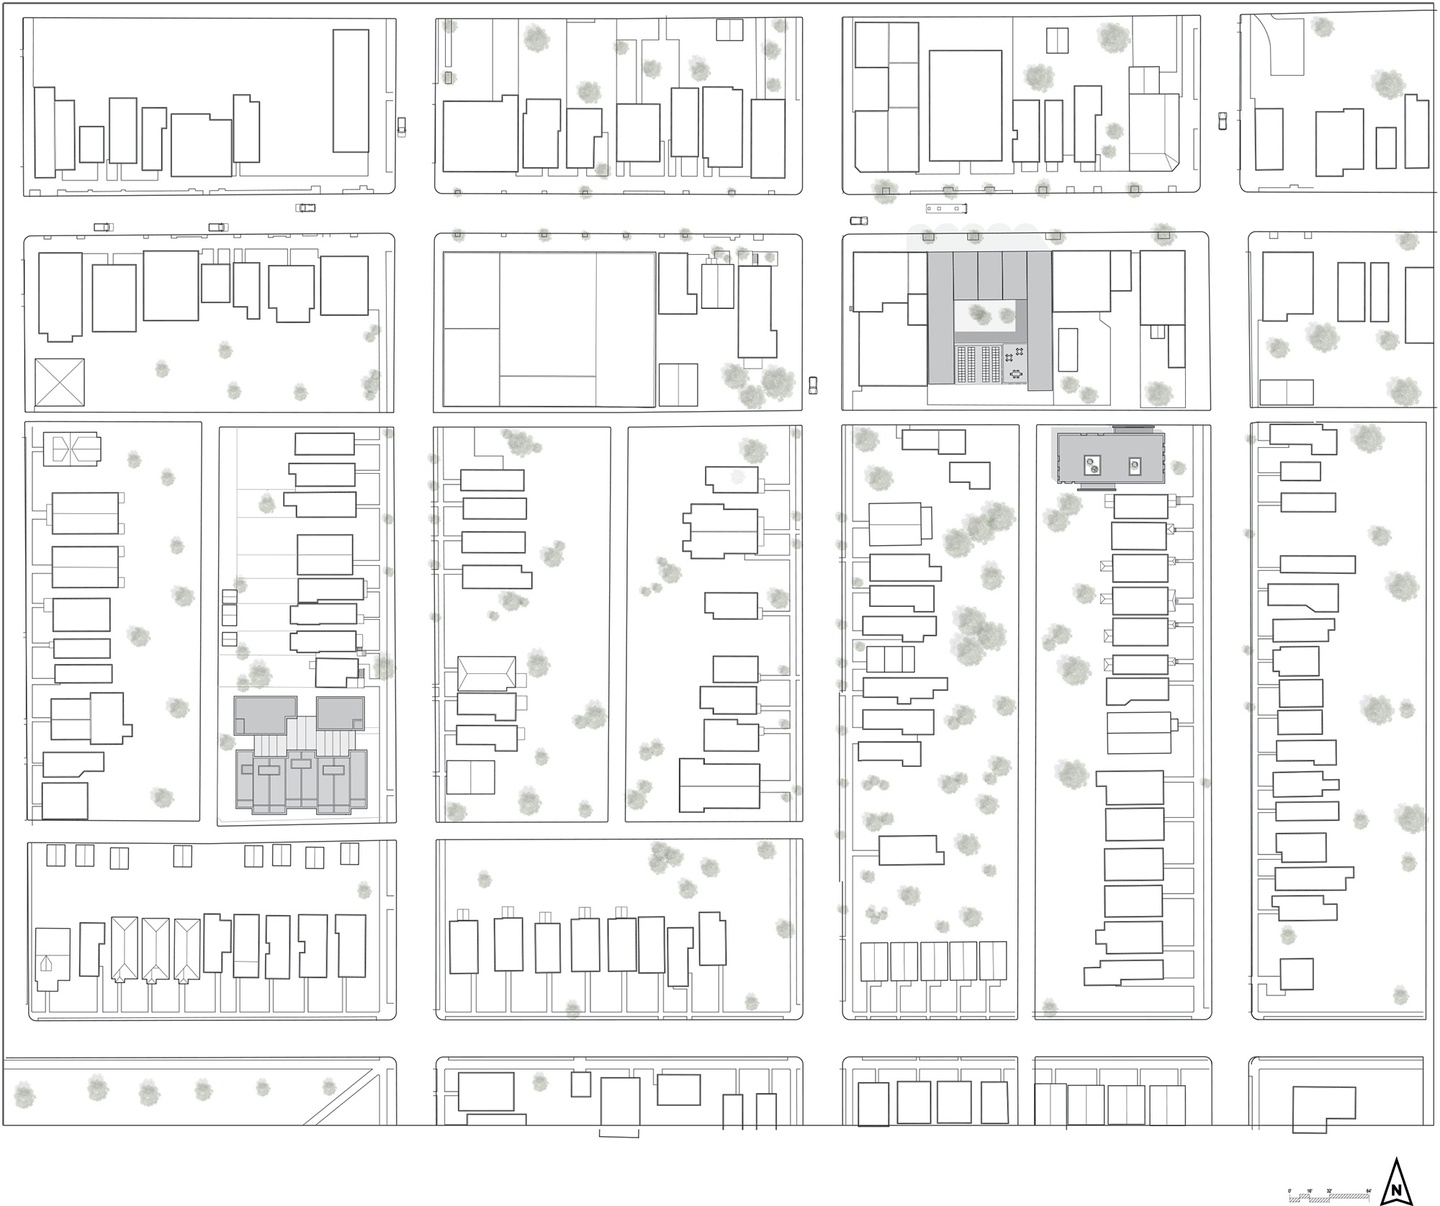 Computer line drawing of three gray buildings in different locations within a fairly dense residential area.